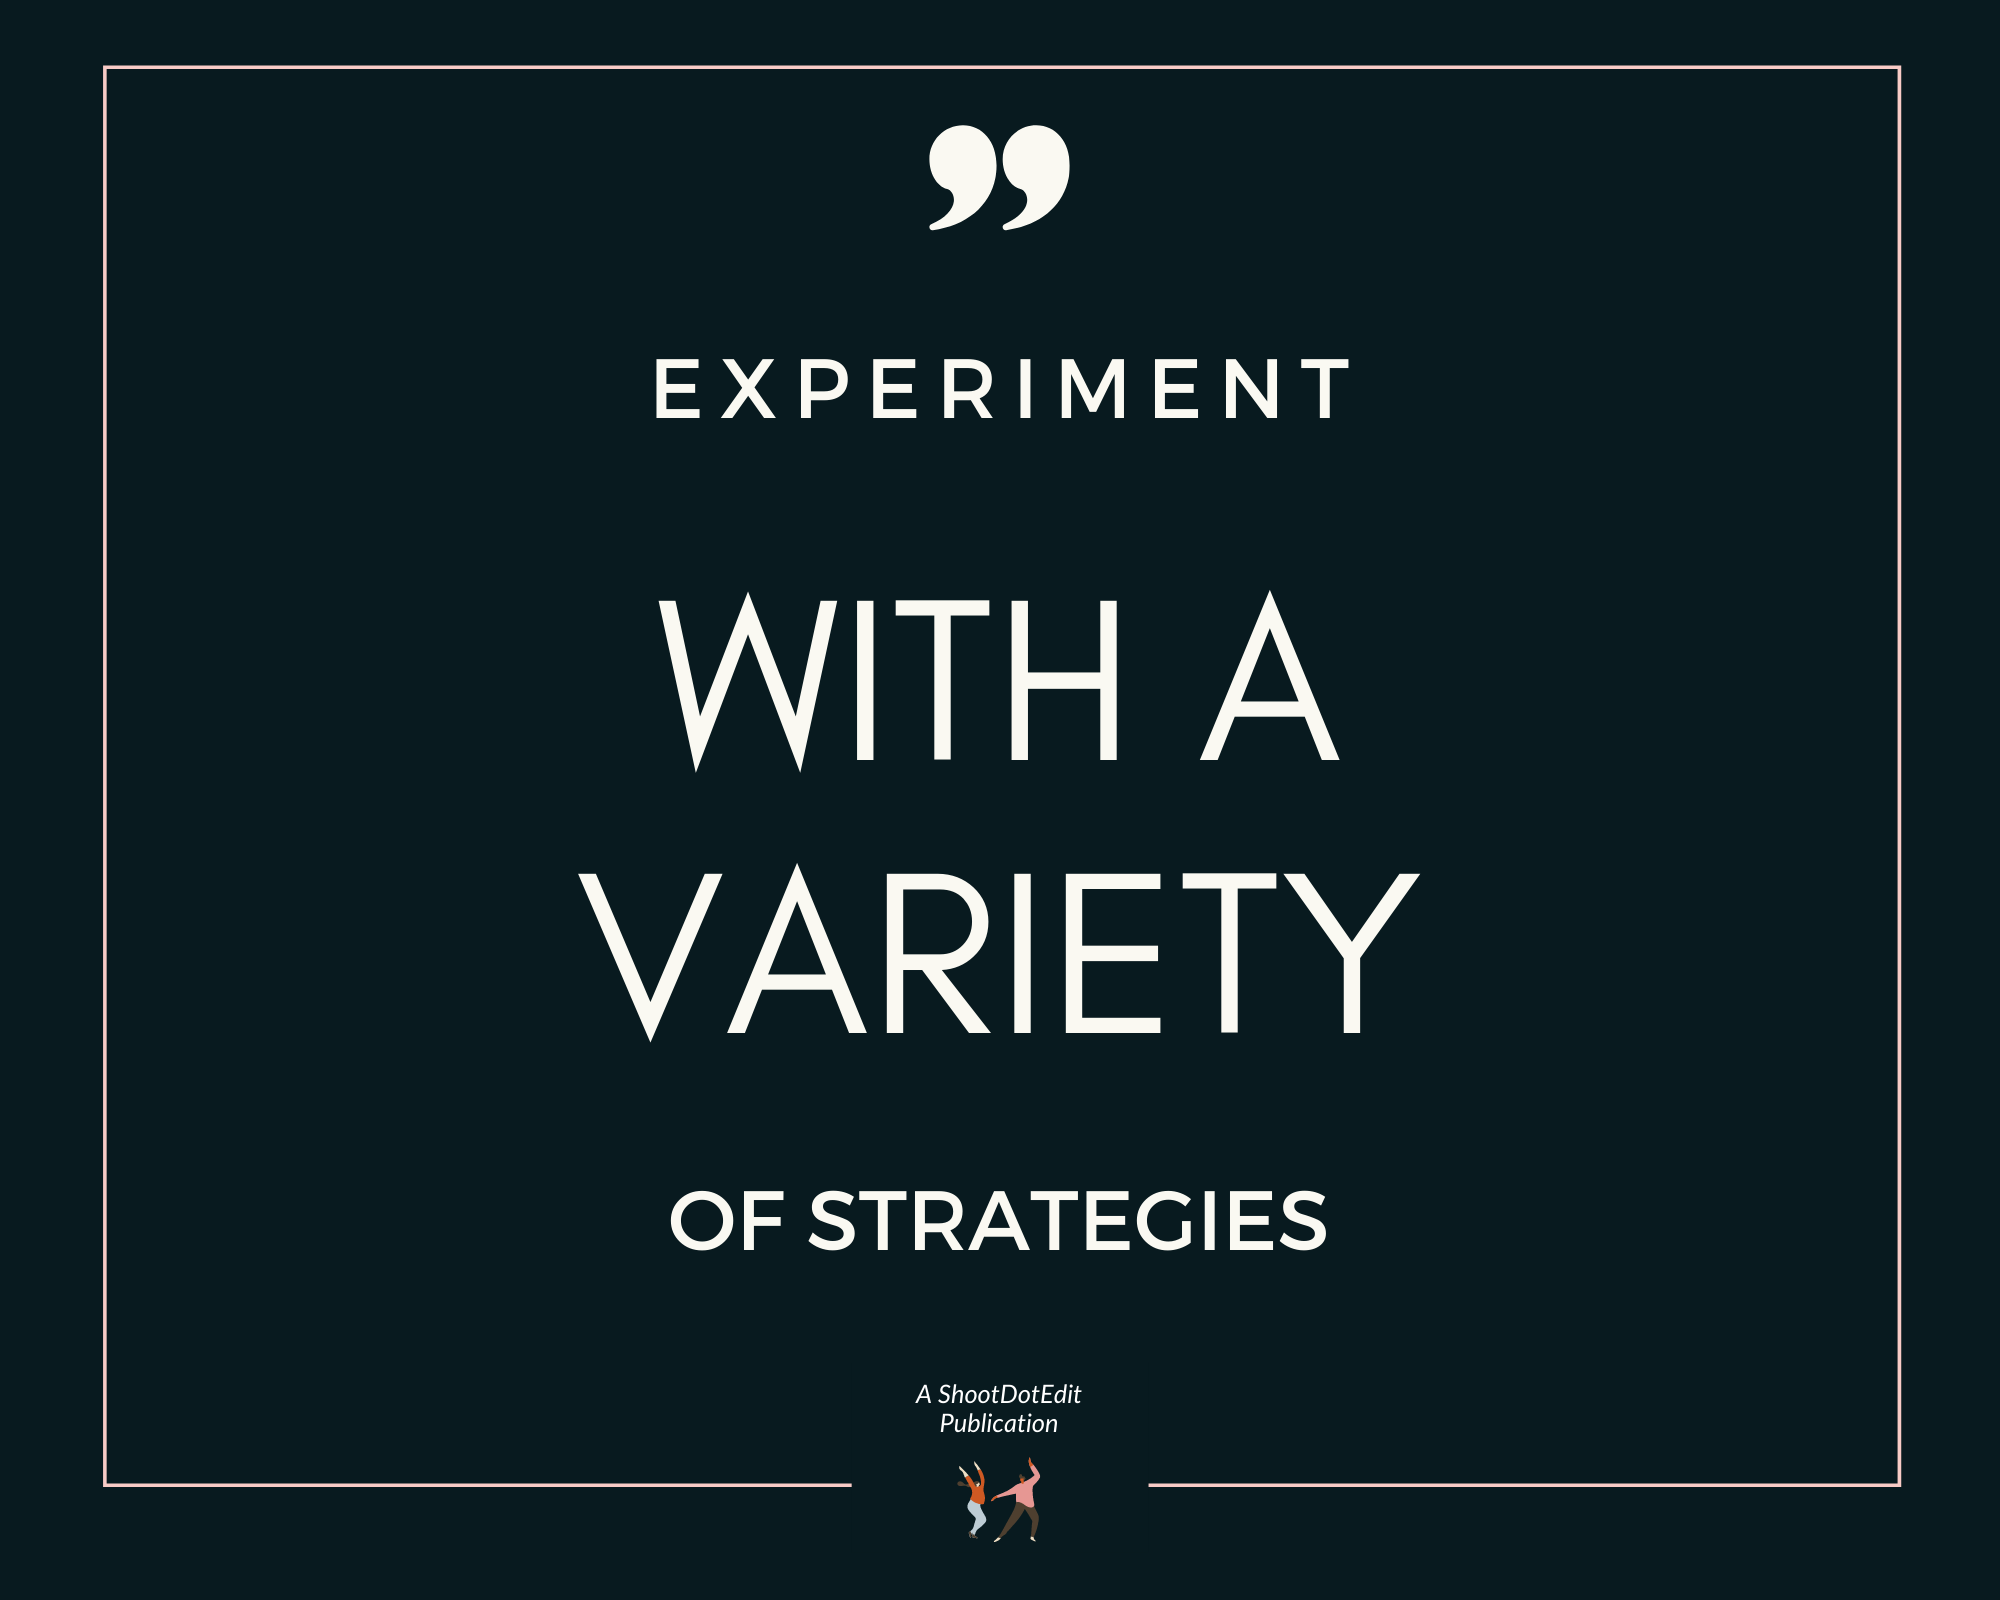 Infographic stating experiment with a variety of strategies